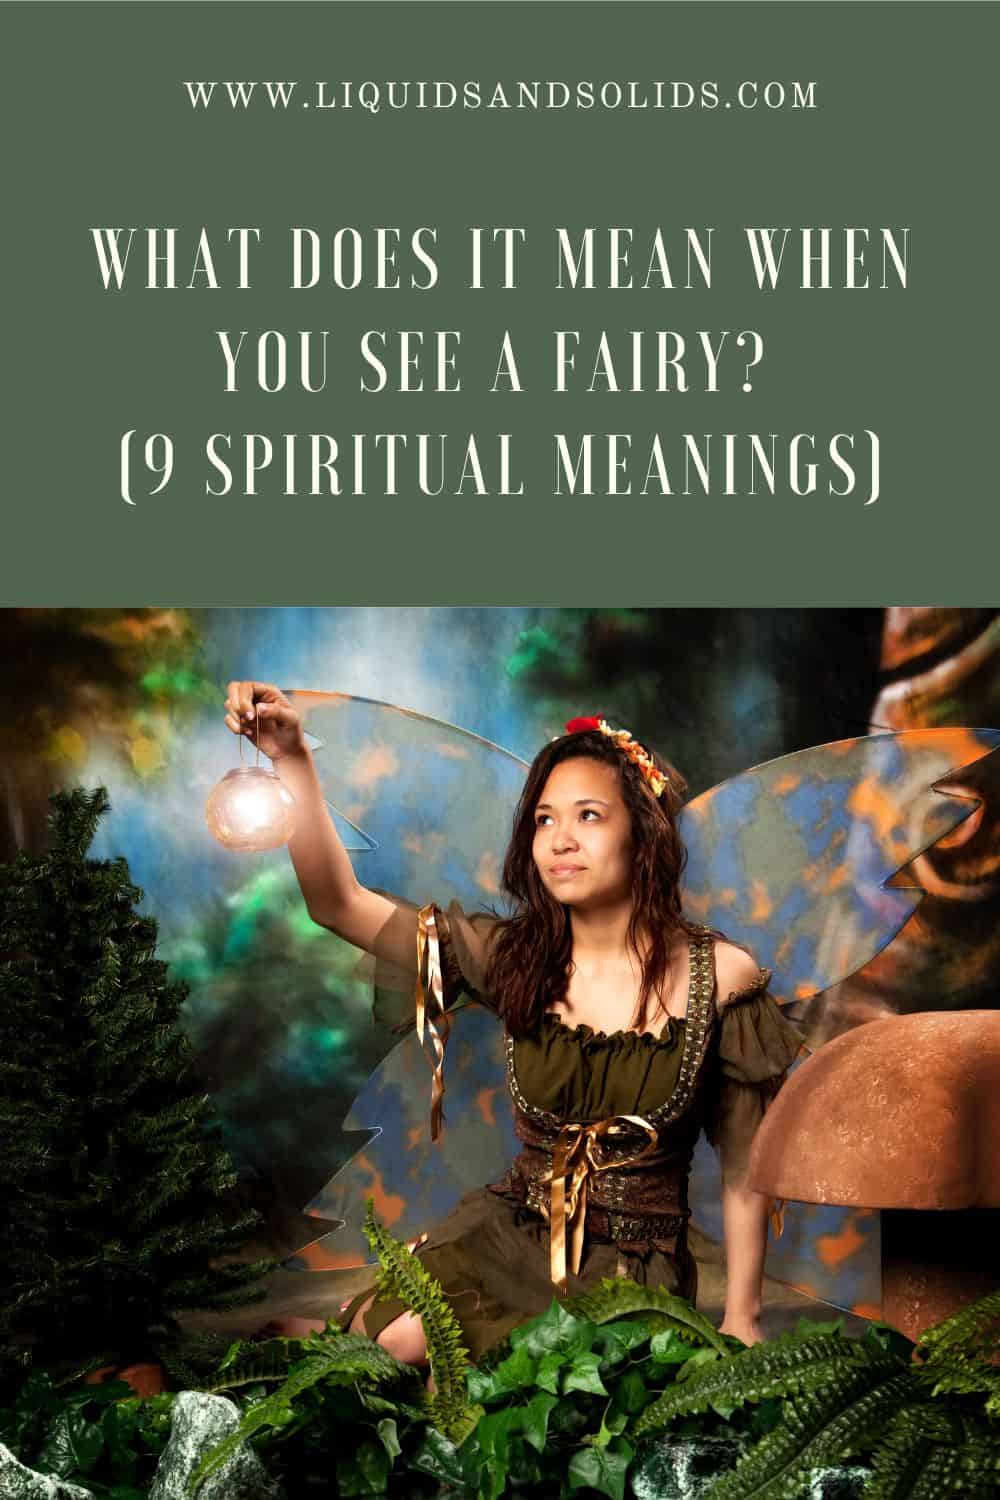 What Does It Mean When You See A Fairy? (9 Spiritual Meanings)